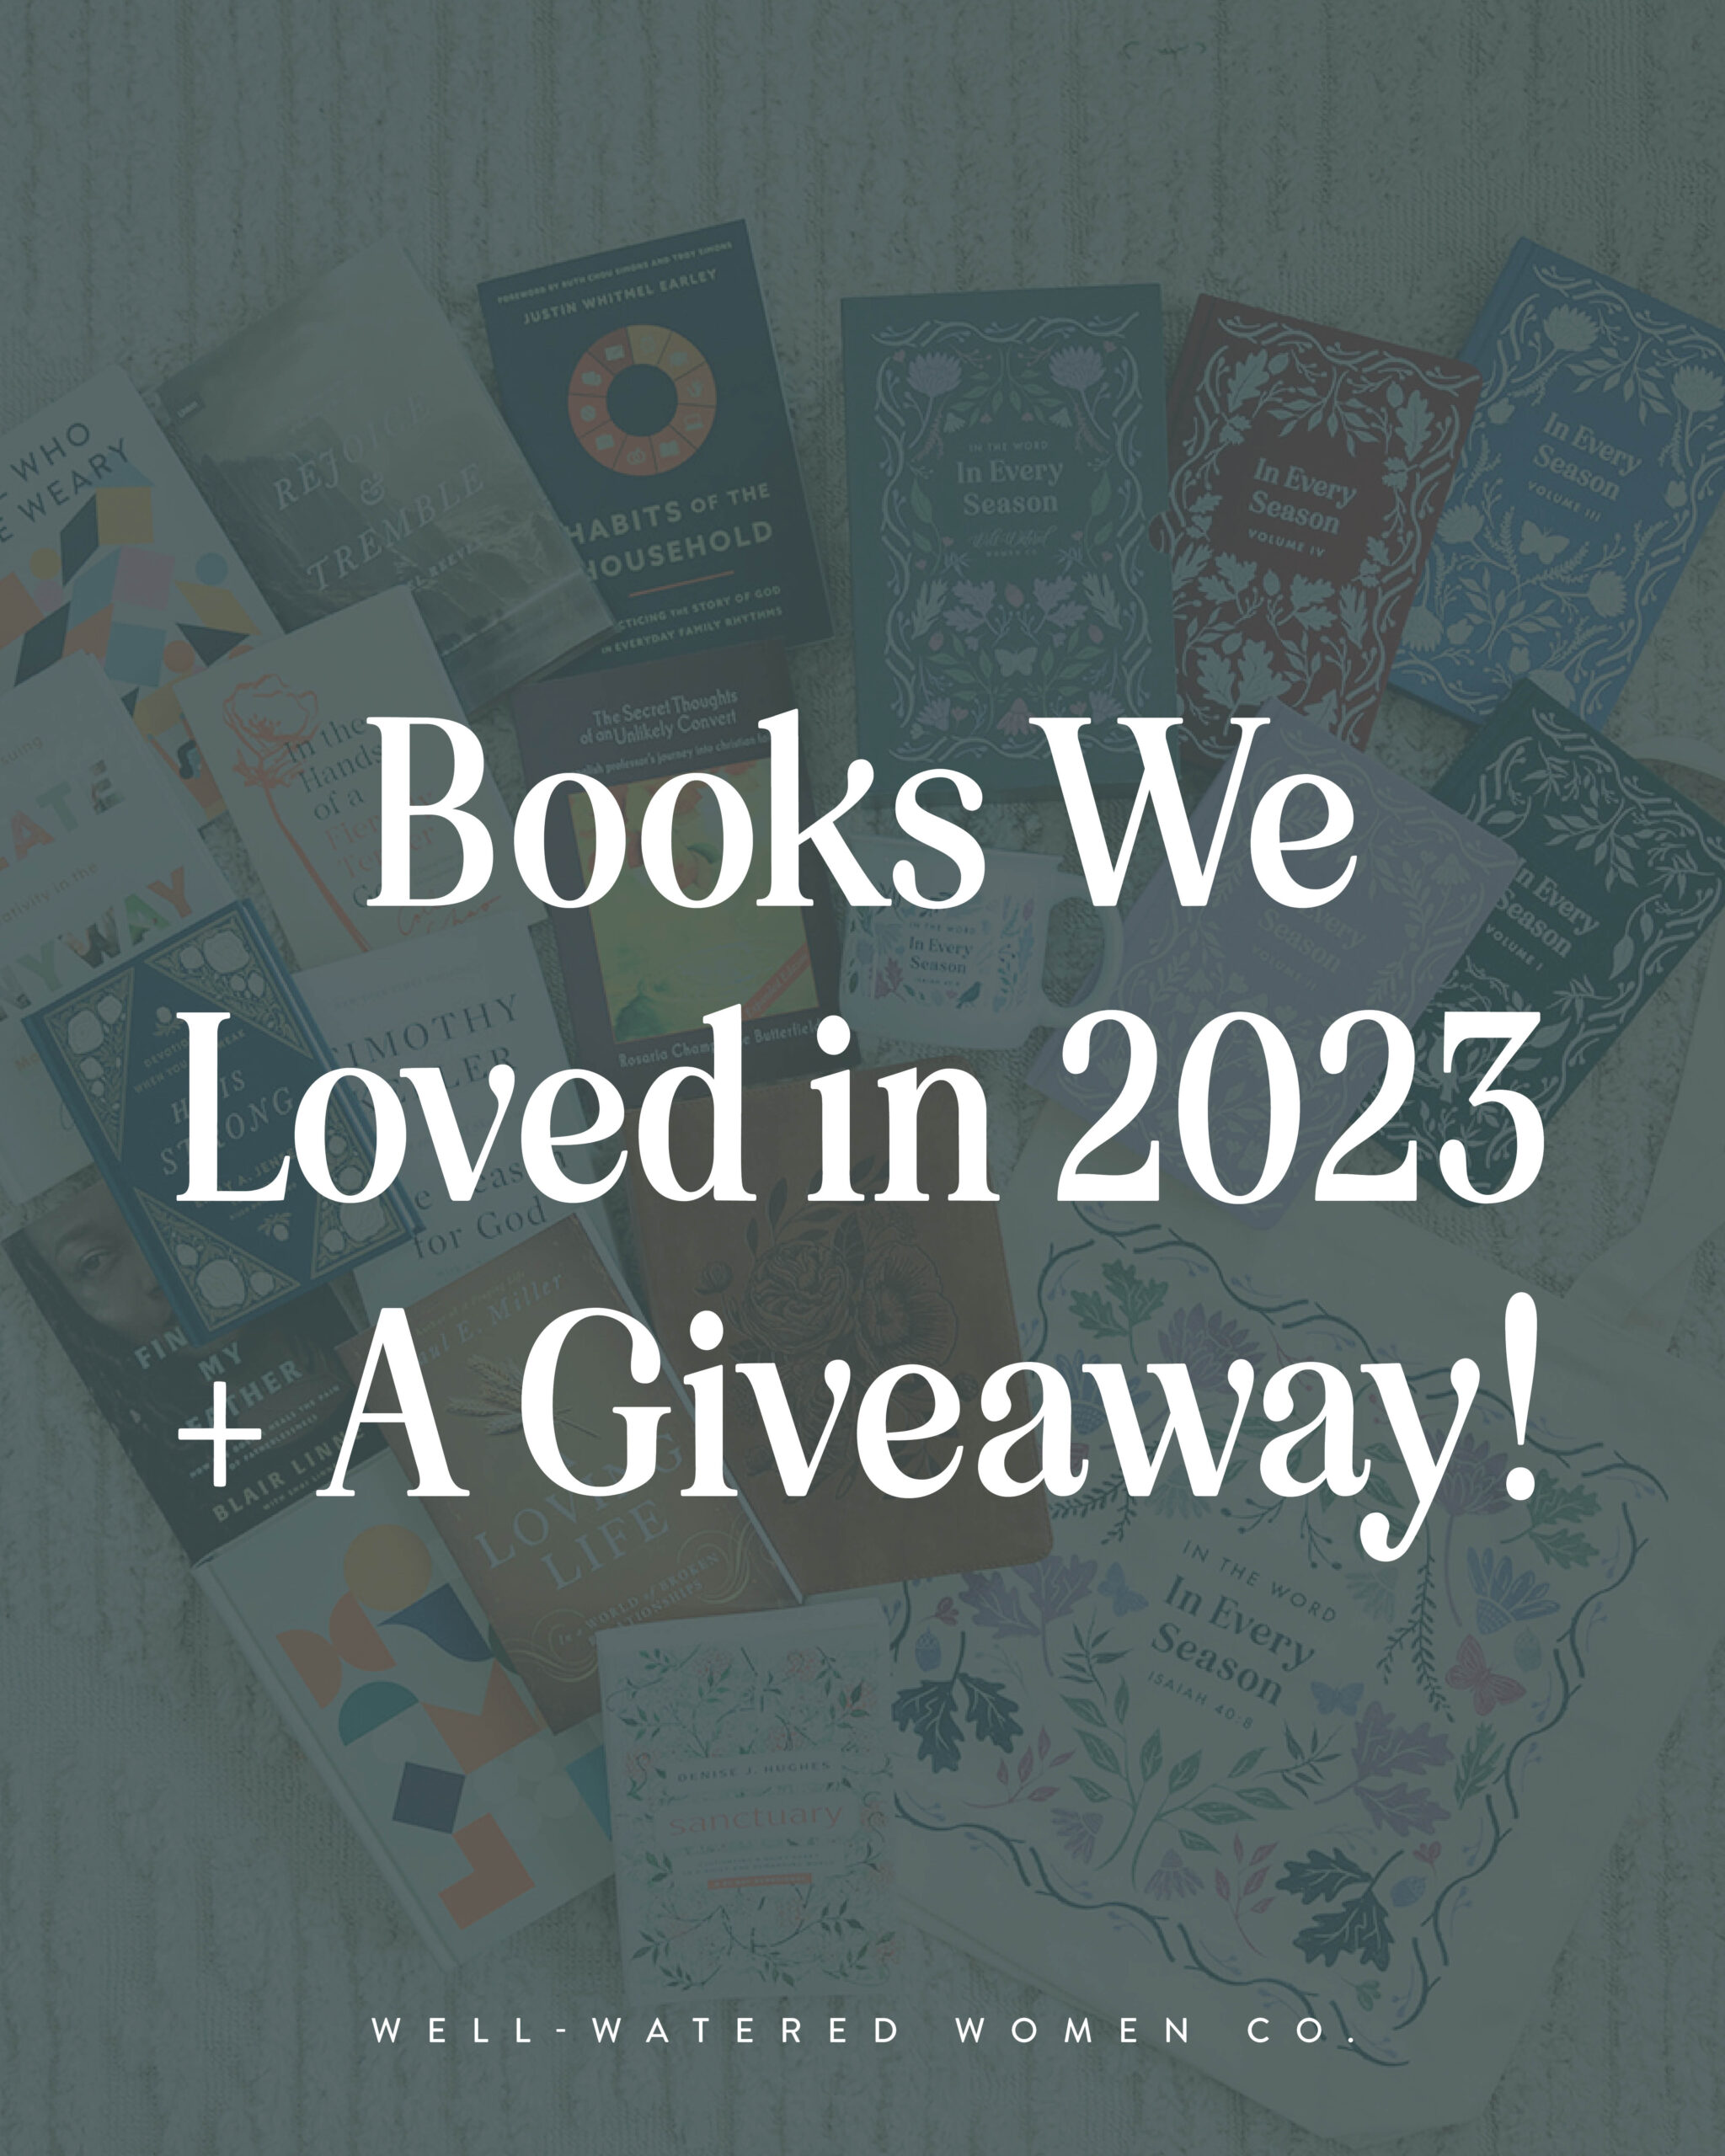 Books We Loved in 2023 + A Giveaway! - an article from Well-Watered Women